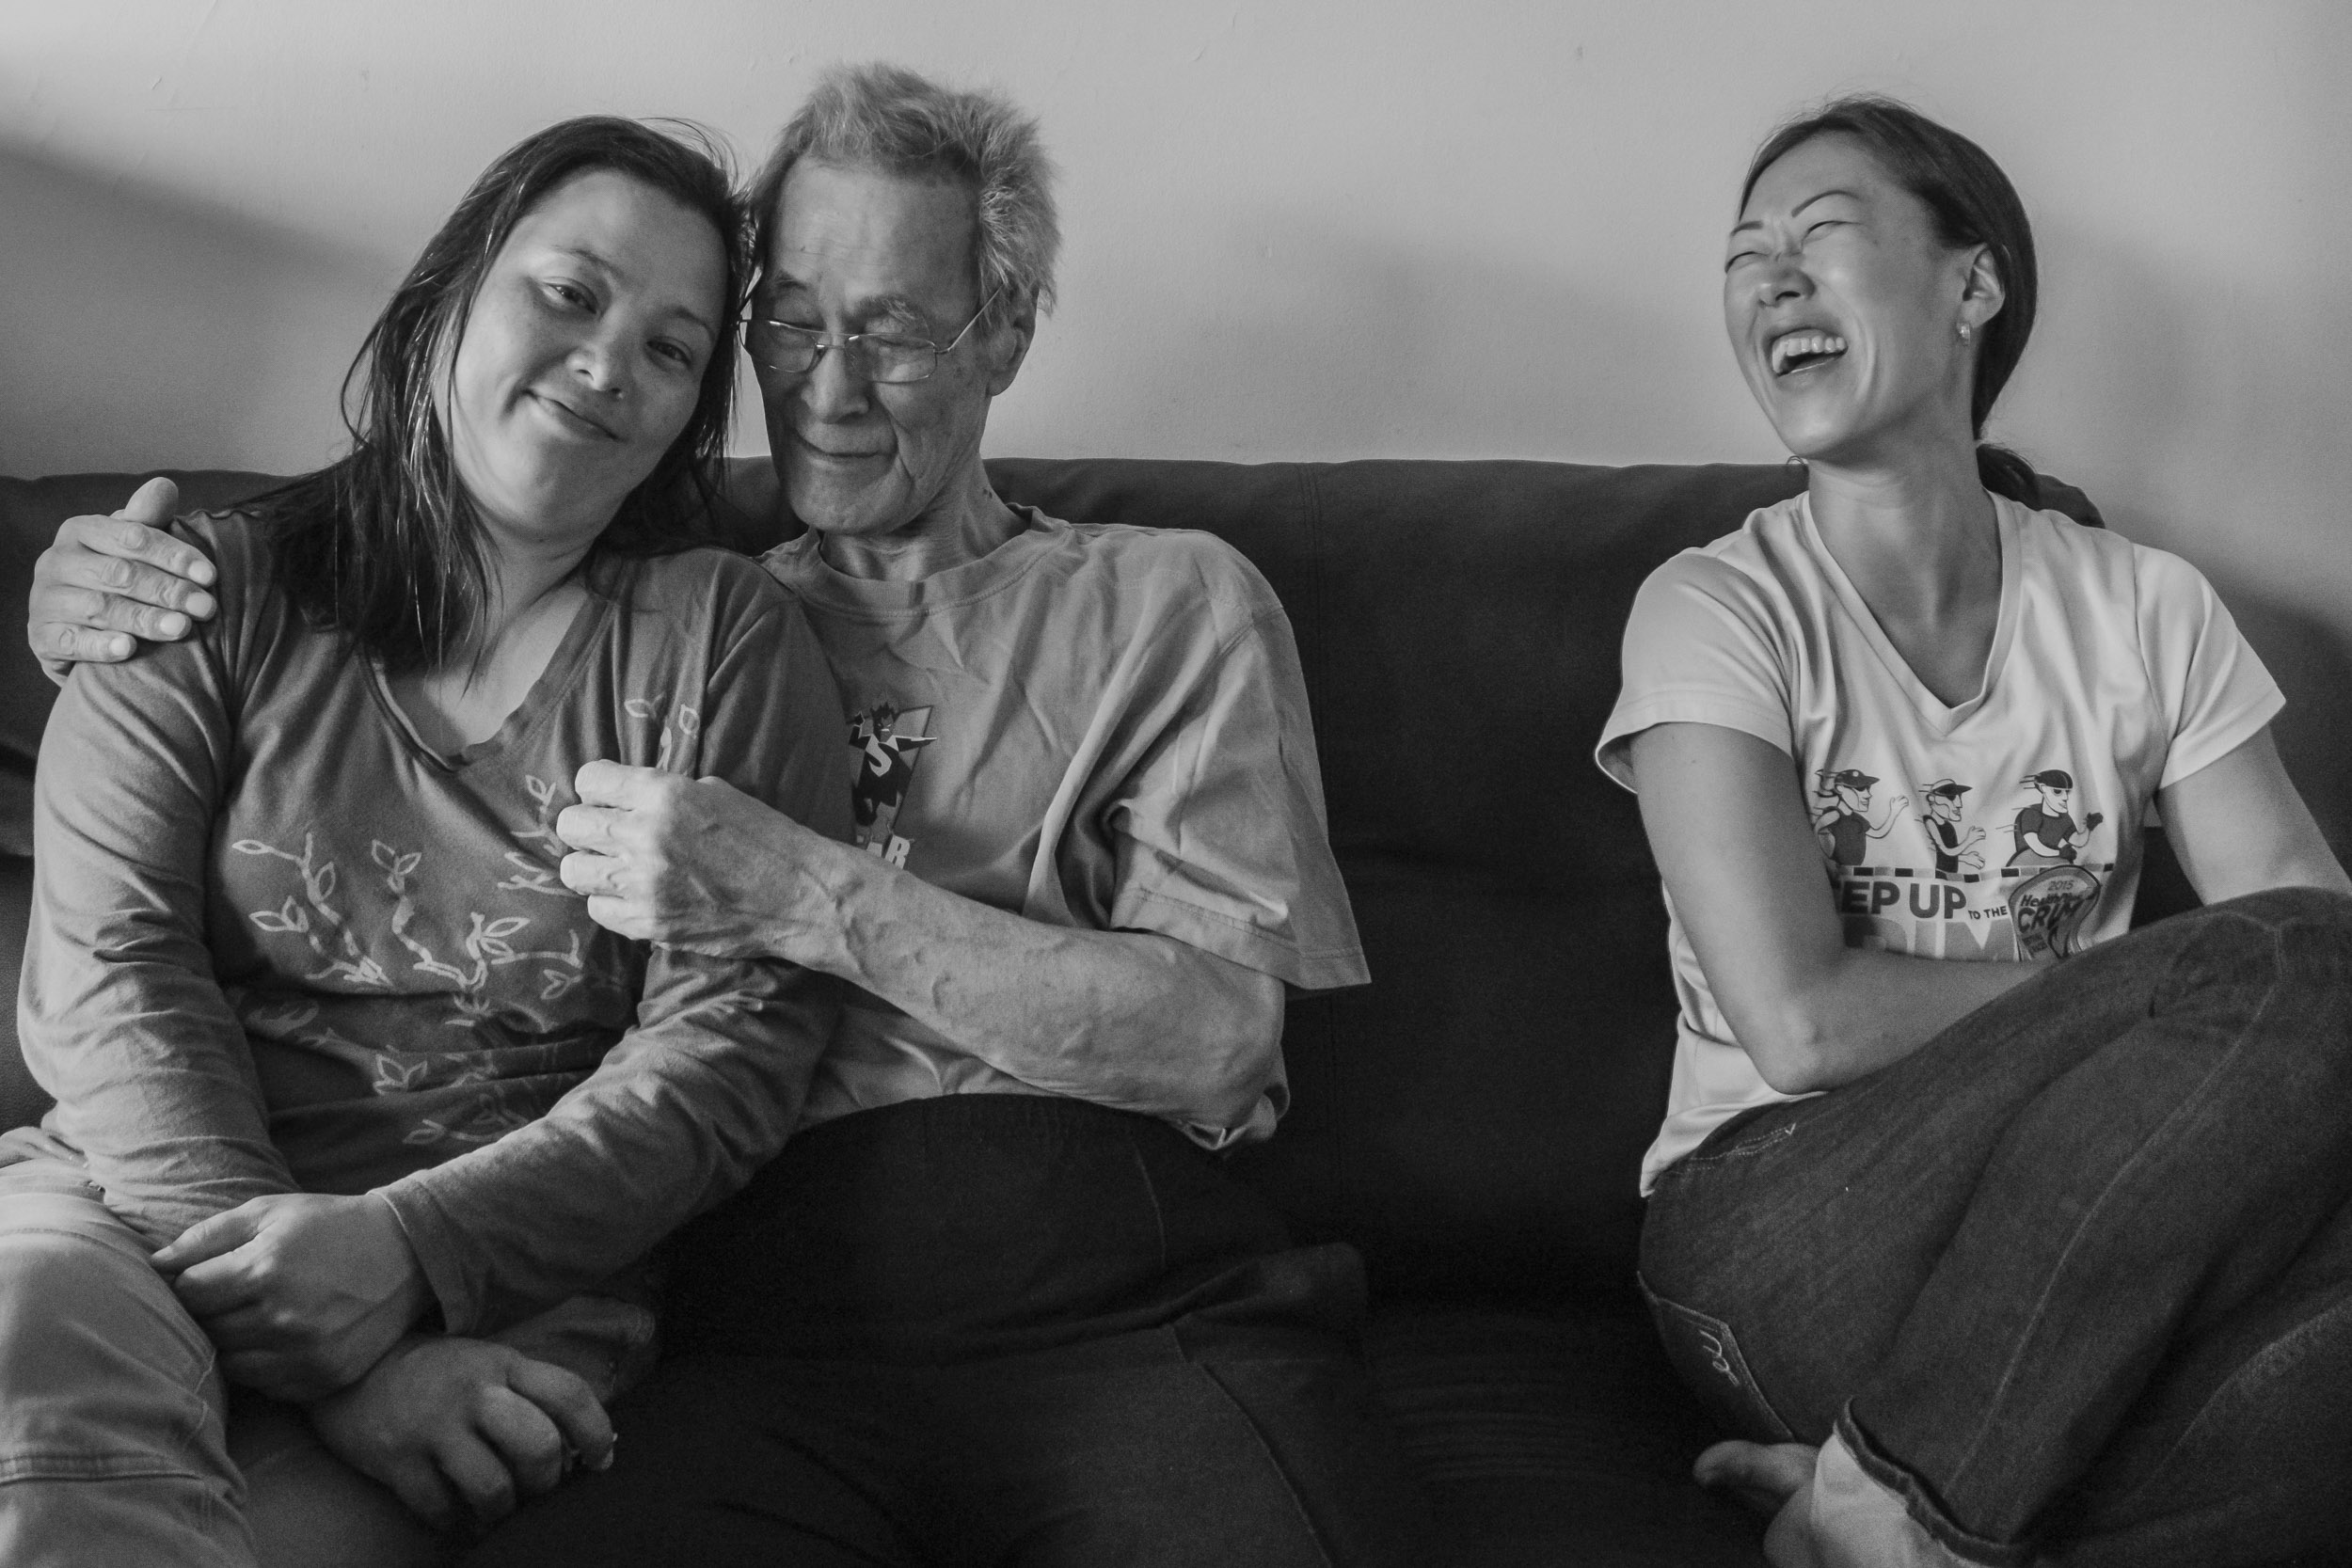  Terminally ill Chinsoo Kim is spending time with family visiting from out of state. He is sitting in his living room with his niece Celeste Pretzel (left) and his oldest daughter Nancy Kim (right). September 2, 2017. Chinsoo Kim’s apartment in the C